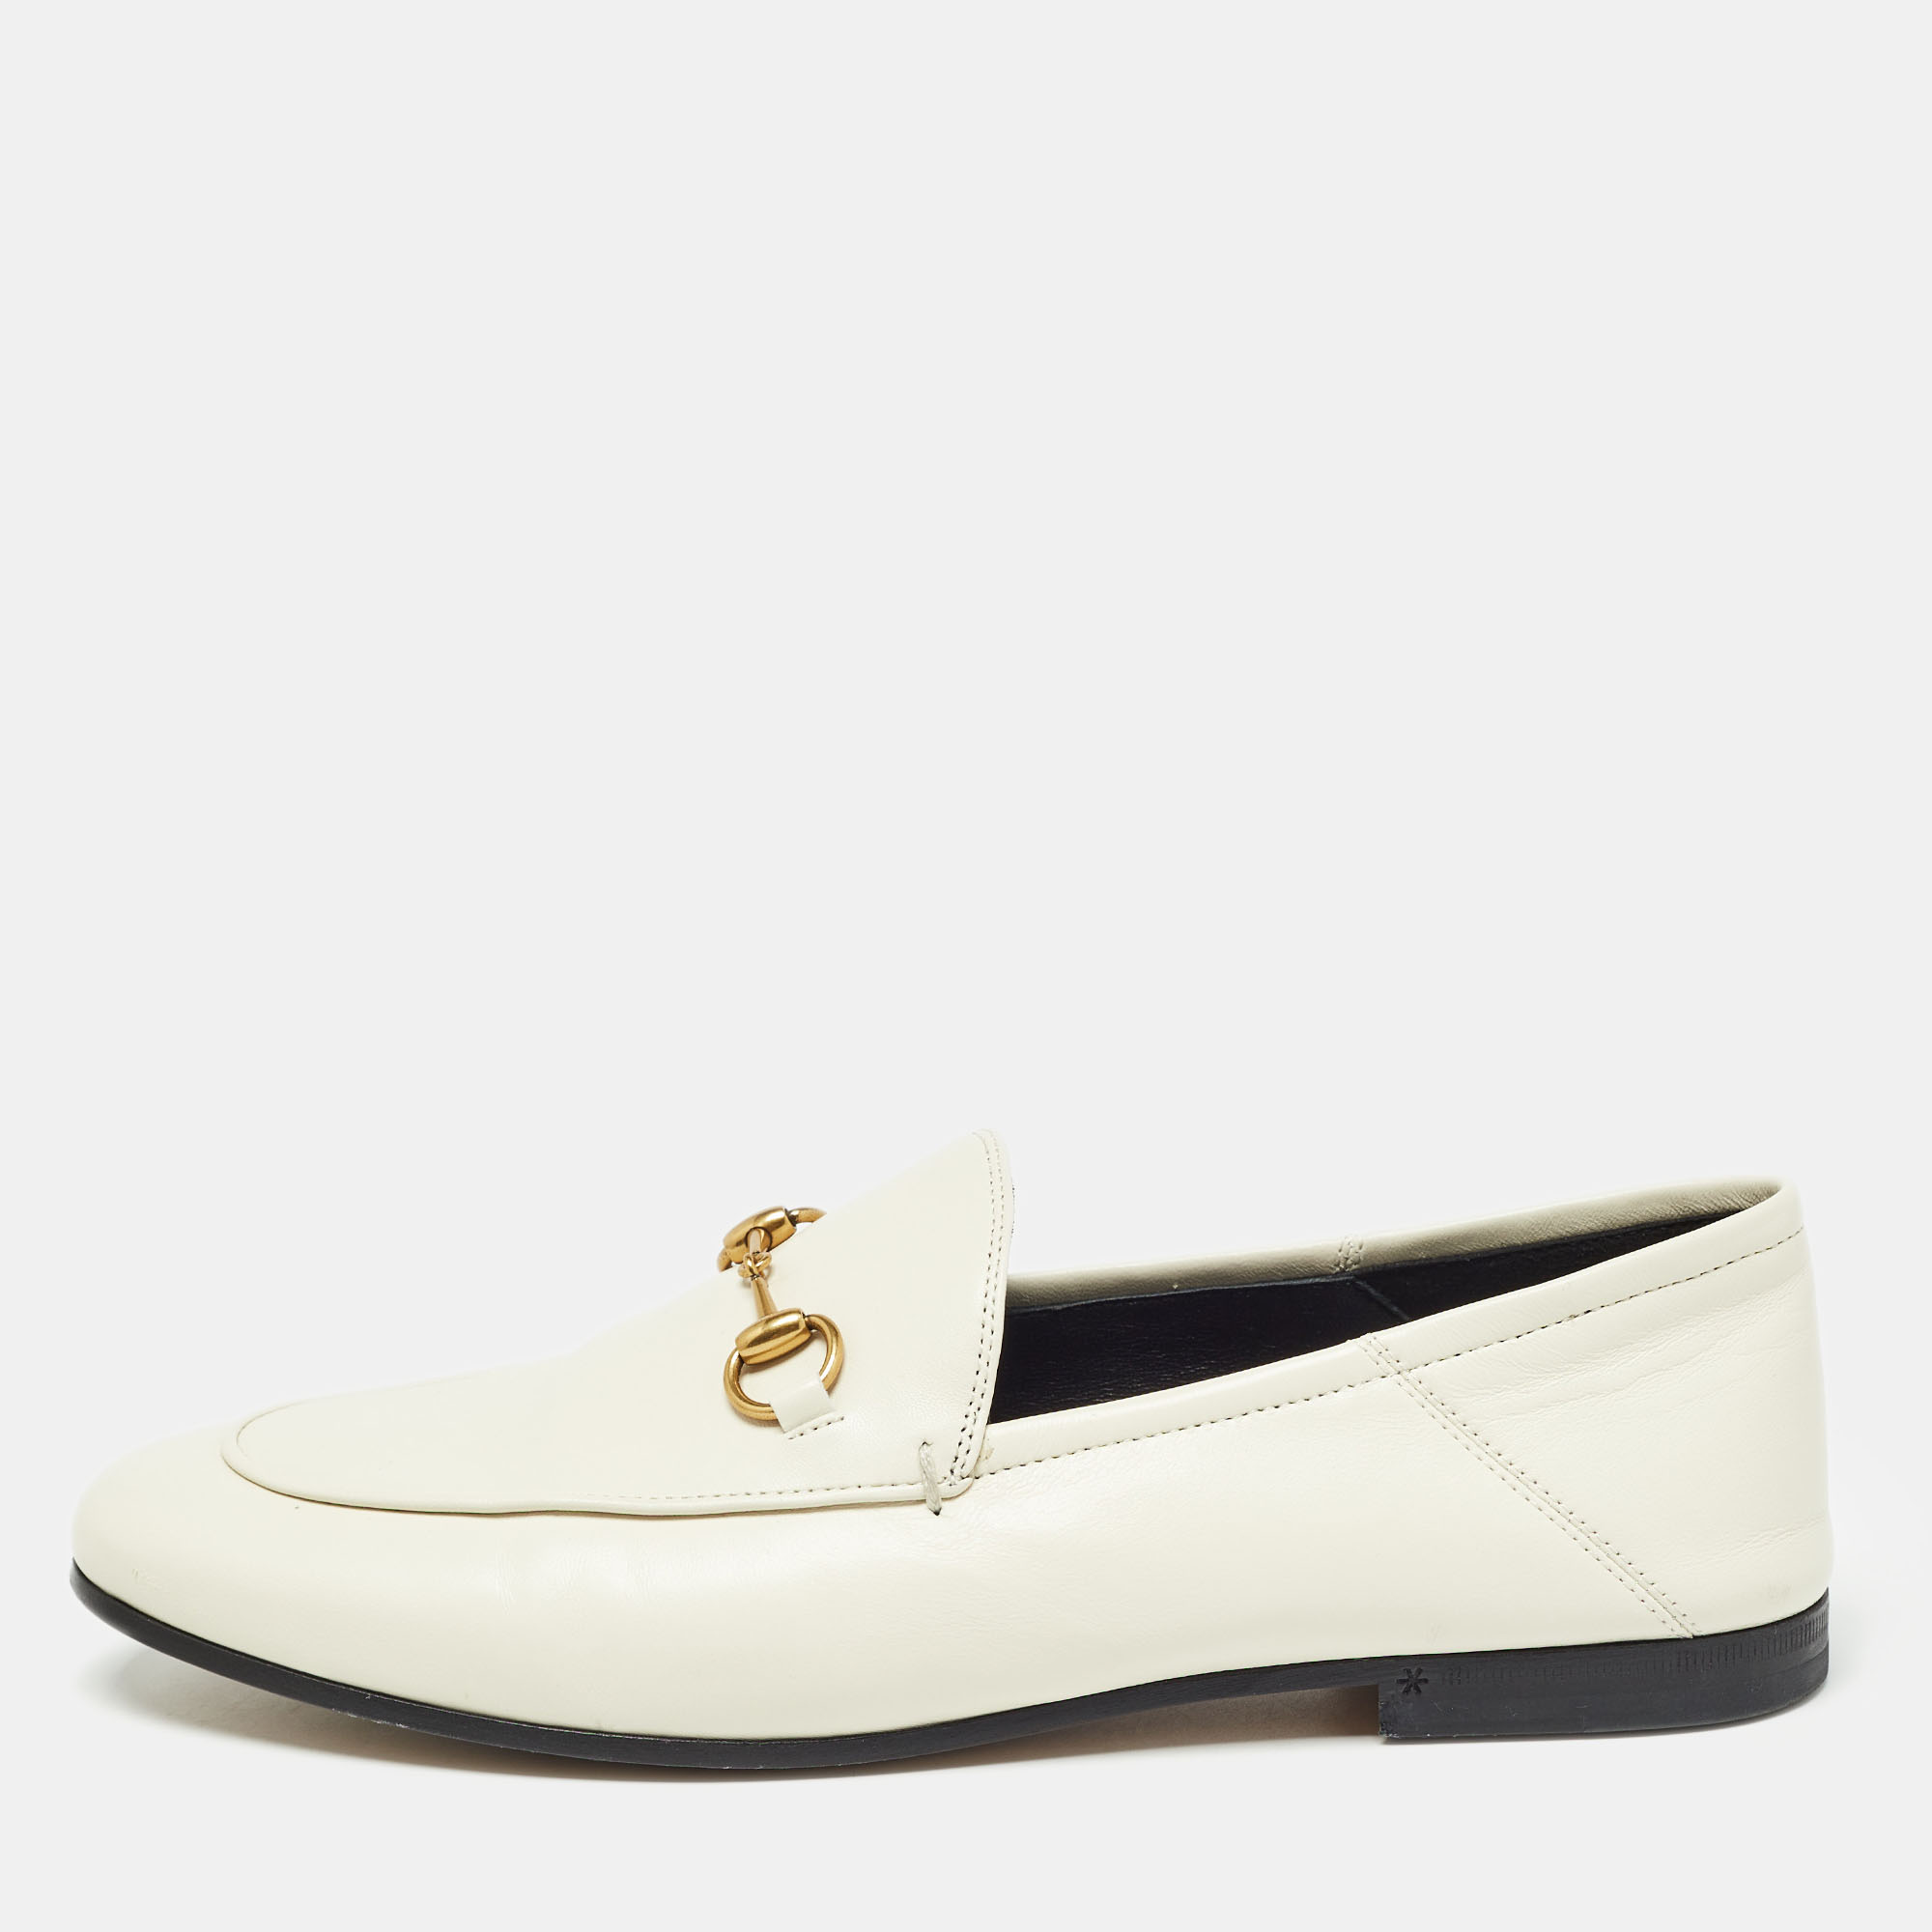 Pre-owned Gucci Cream Leather Jordaan Loafers Size 40